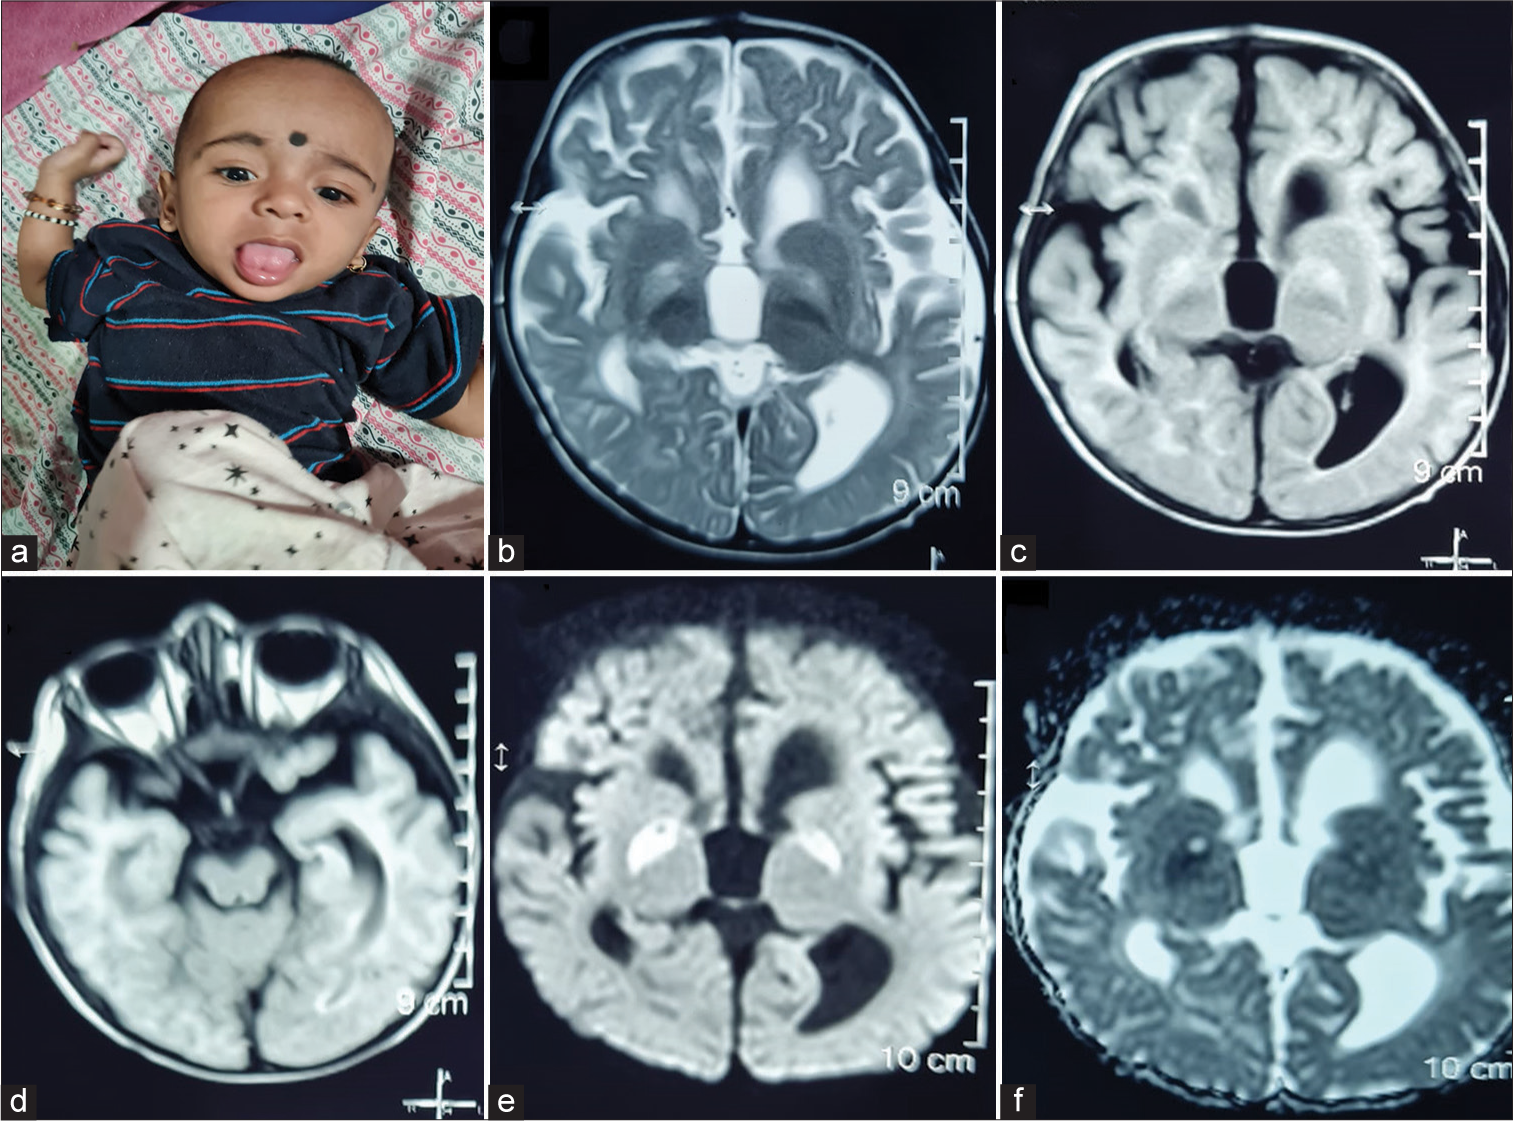 (a) Clinical photograph of the child showing tongue and upper limb dystonia, (b) axial T2-weighted (Two headed arrow), (c) fluid-attenuated inversion recovery sequences of magnetic resonance imaging of brain images showing bilateral symmetrical globus pallidus hyperintensity, bilateral basal ganglia atrophy, predominantly involving globus pallidus (left more than right) (Two headed arrow), (d) cerebral peduncles appear normal (Two headed arrow), (e) axial diffusion weighted images (DWIs) (Two headed arrow) show restriction of diffusion in bilateral globus pallidus, with hyperintensity on DWI images and (f) hypointensity of corresponding apparent diffusion coefficient maps (Two headed arrow).